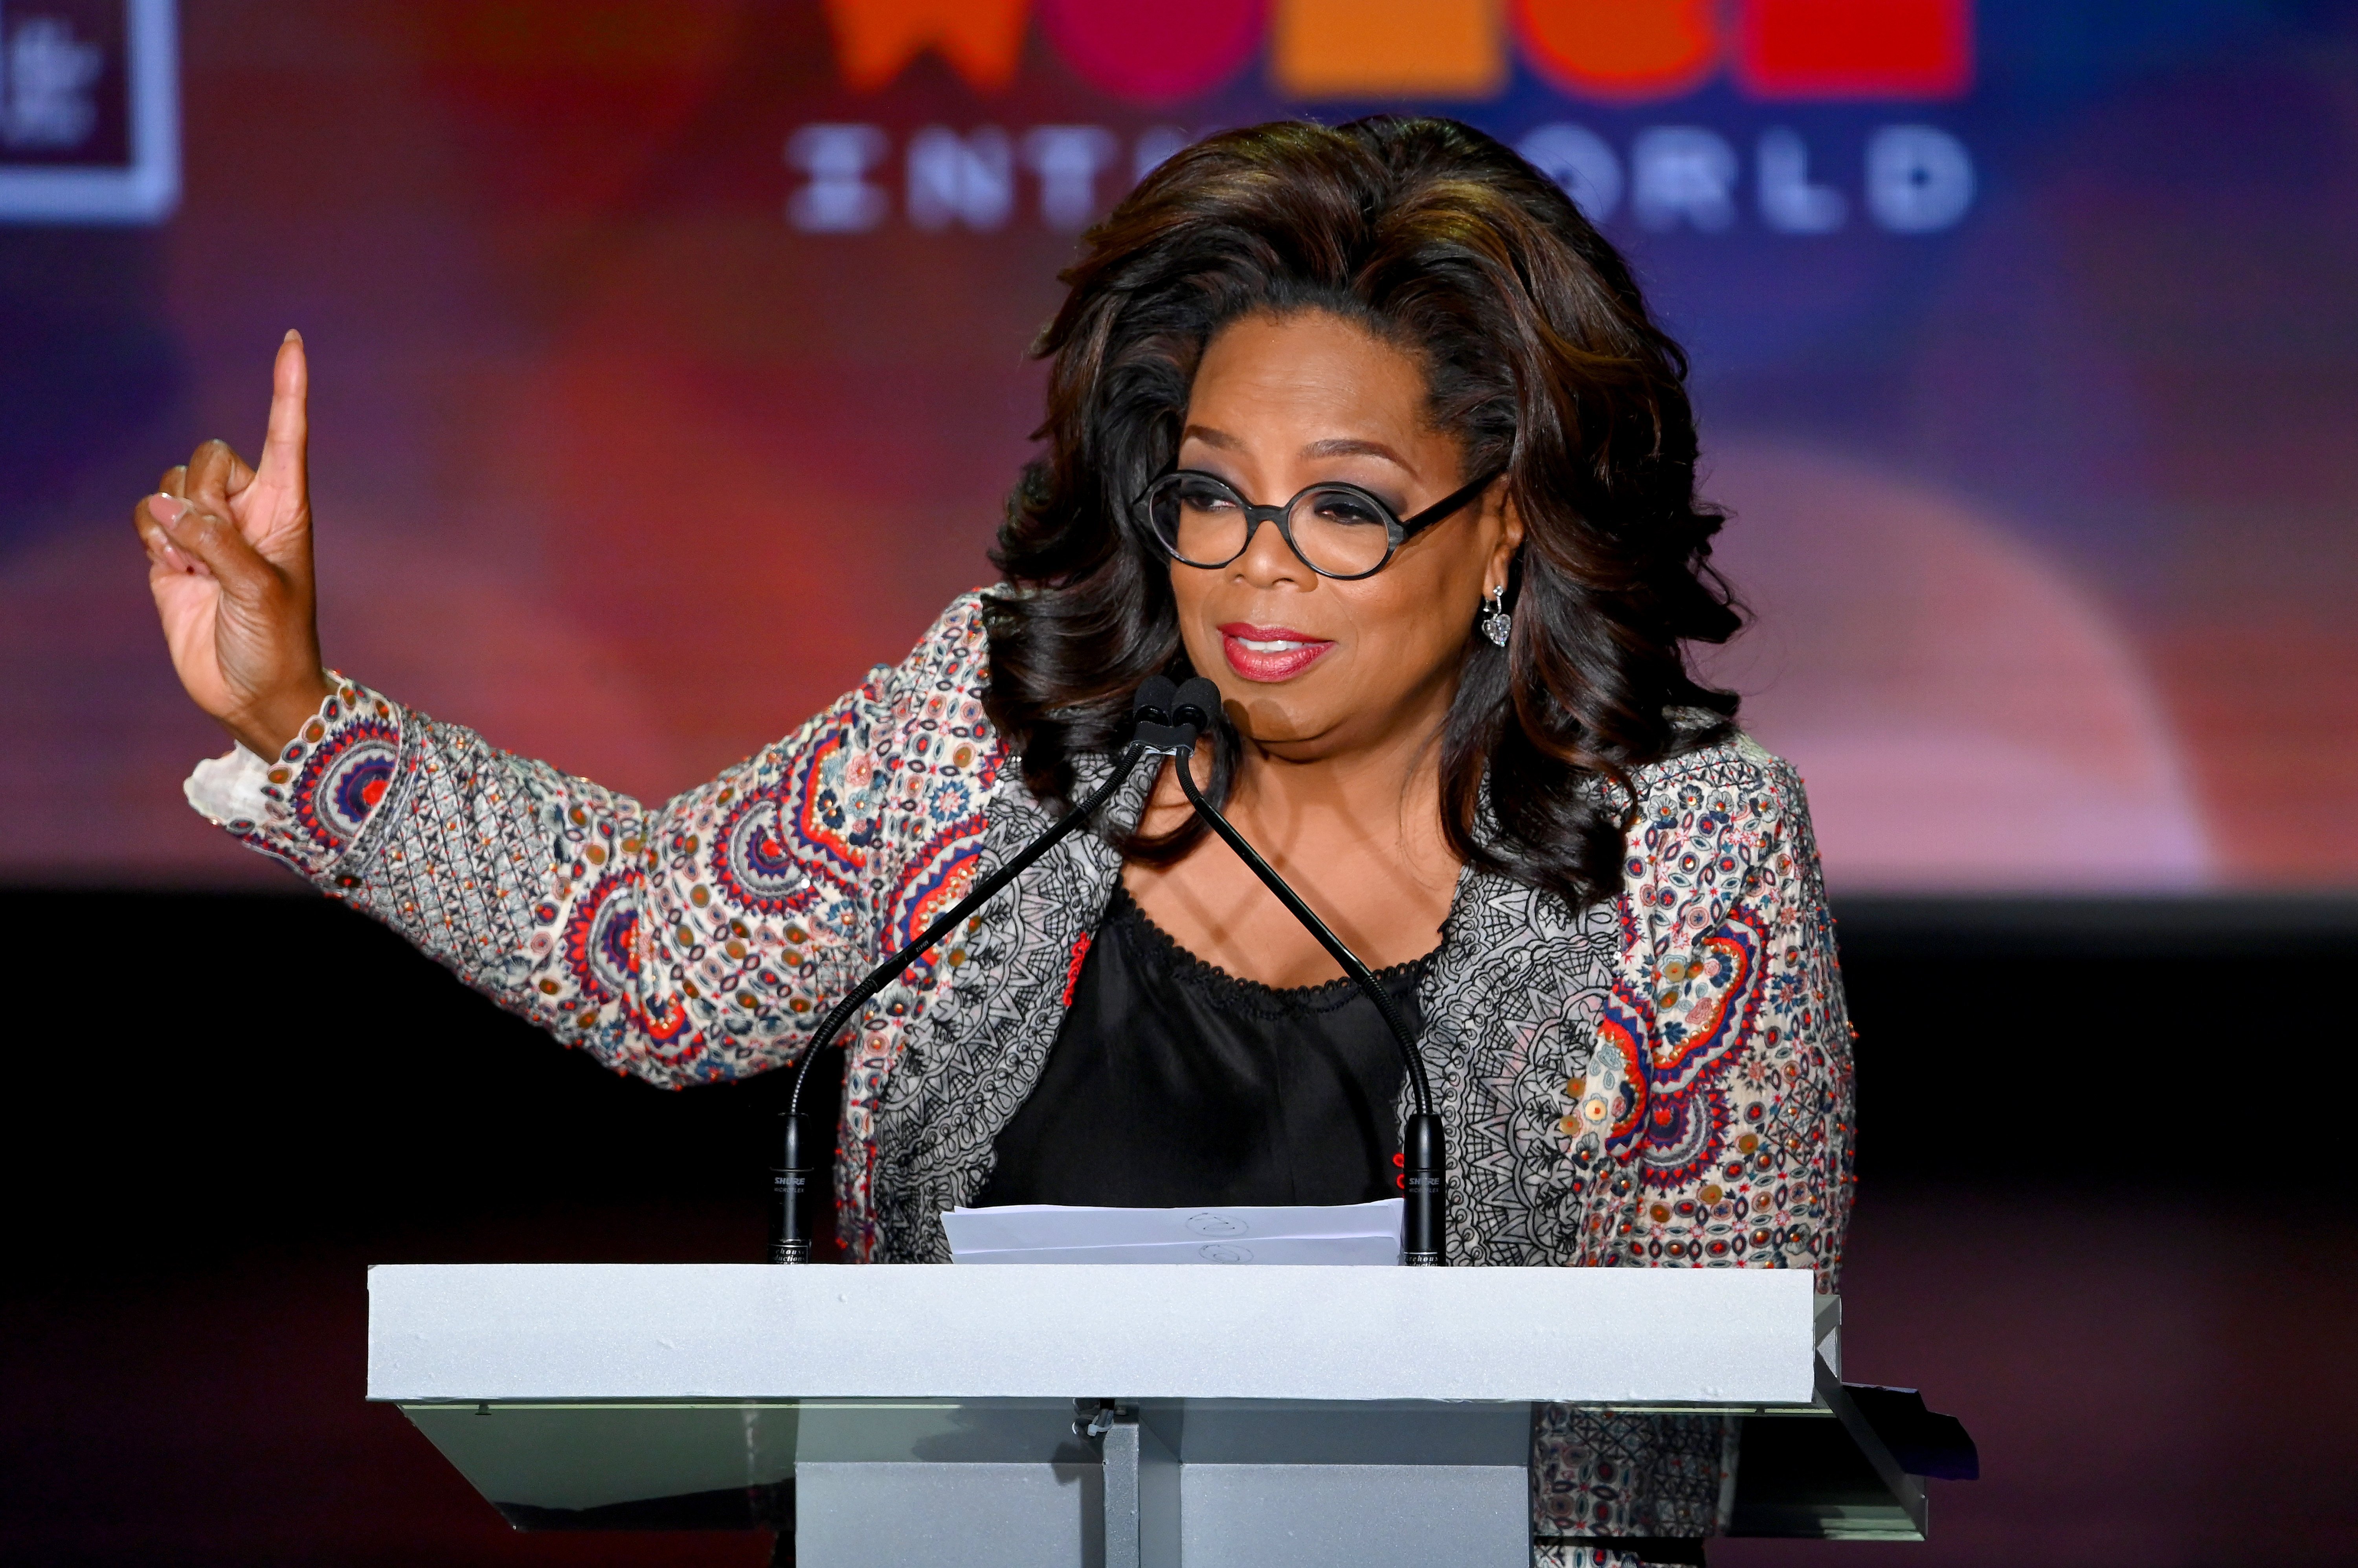 Oprah Winfrey at the 10th Anniversary Women In The World Summit on April 10, 2019 in New York City | Photo: Getty Images